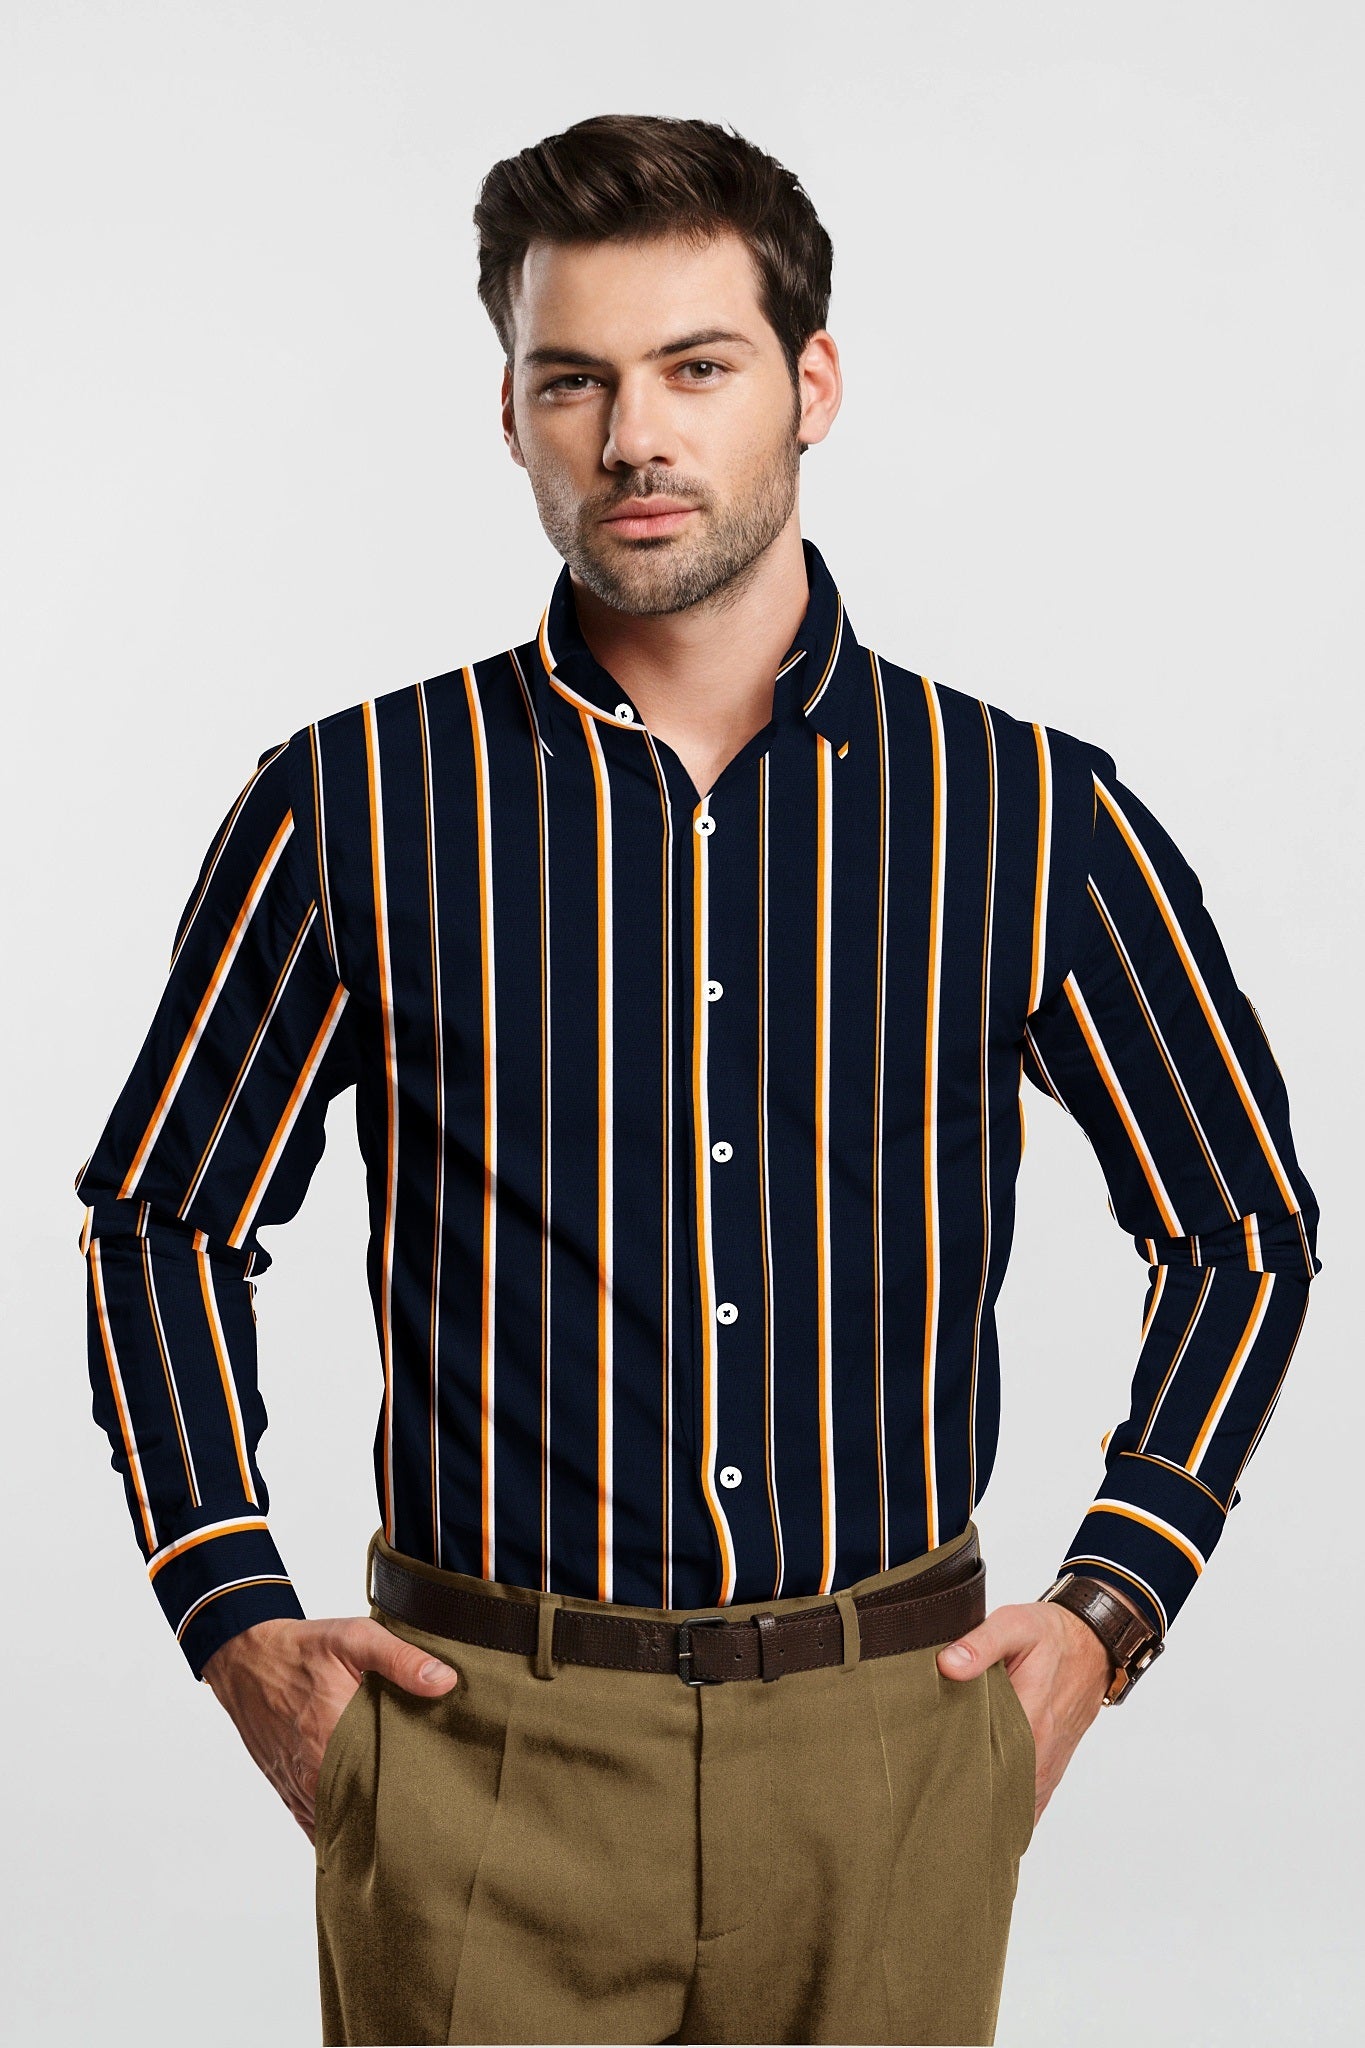 Midnight Blue with Turmeric Yellow and White Stripes Cotton Shirt